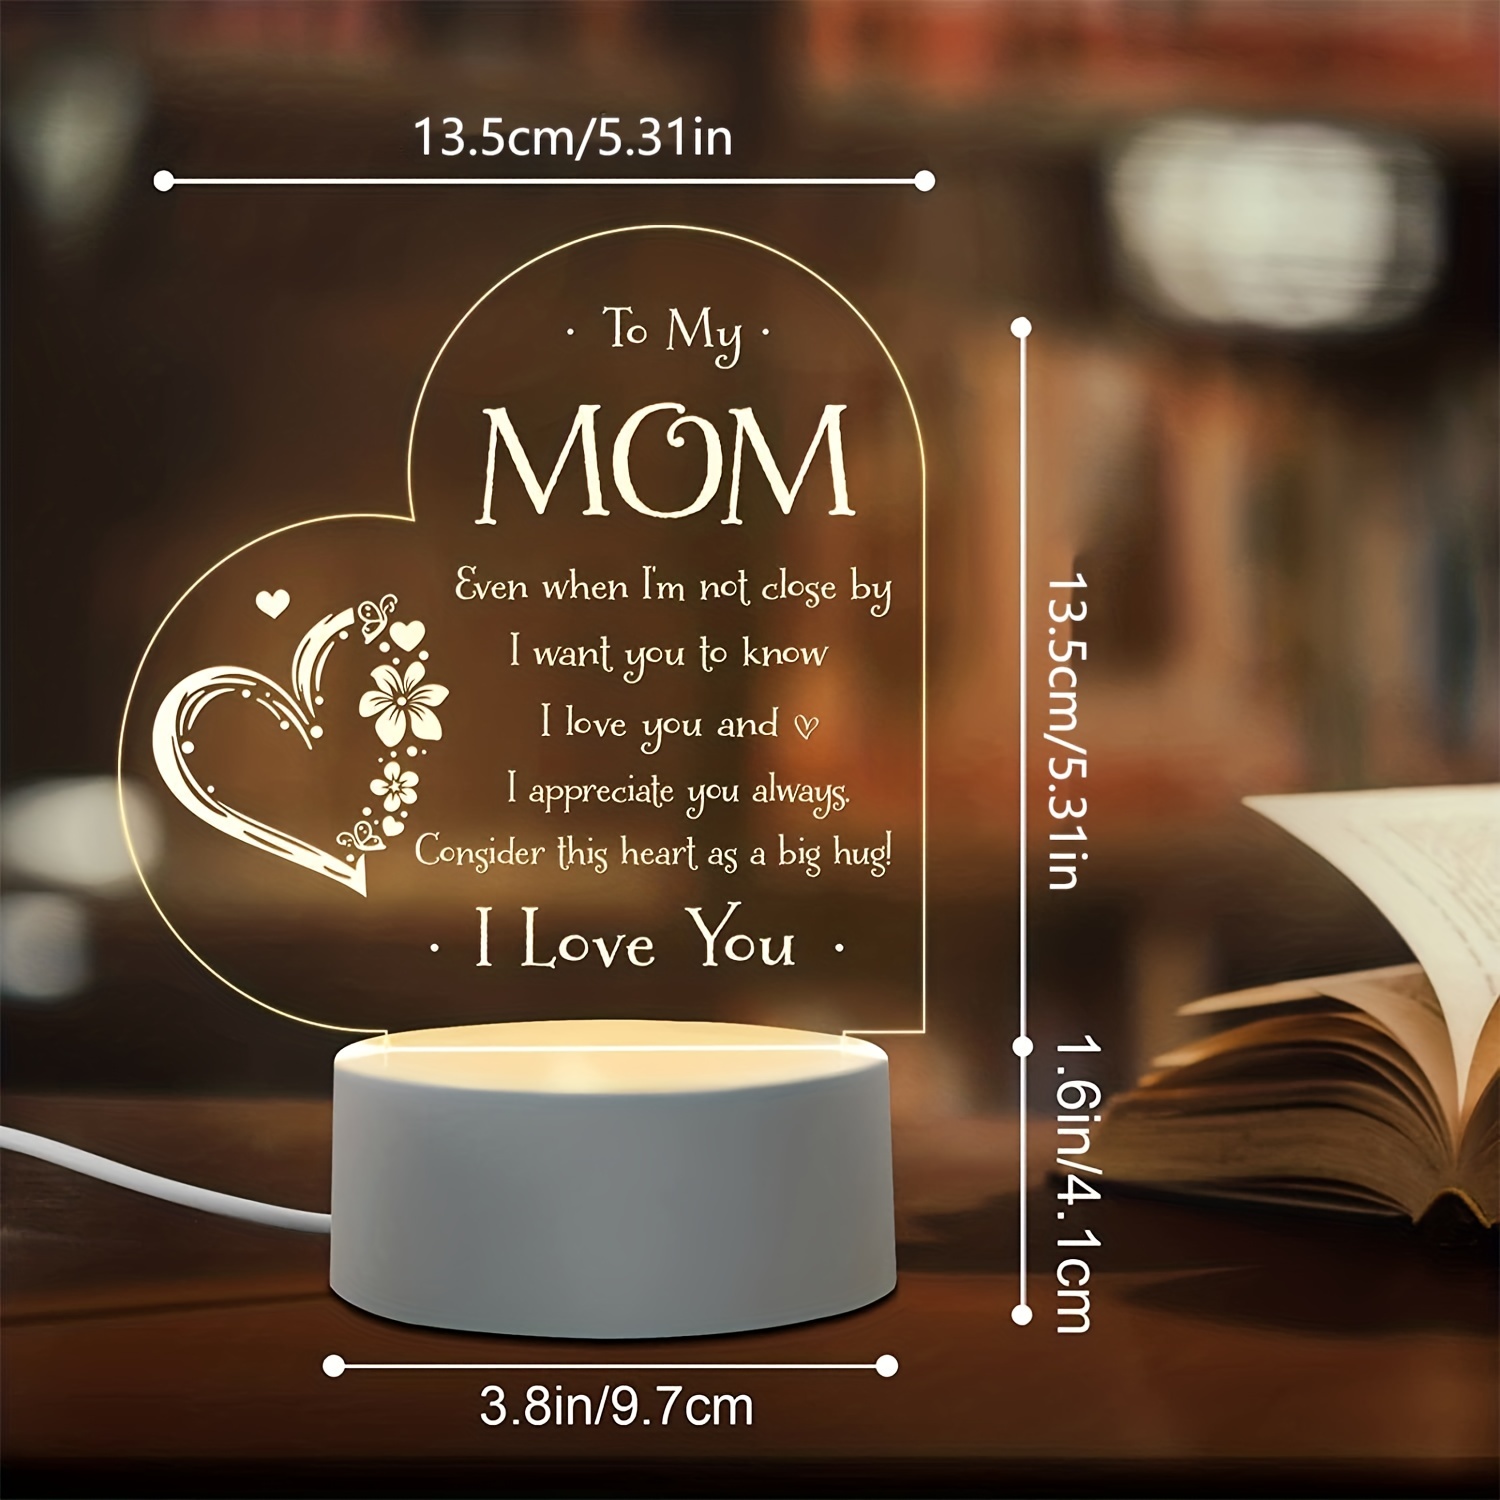 1pc Gifts For Mom - Engraved Night Light, Mom Birthday Gifts From Daughter  Son, Mom Gifts On Mother's Day, Valentine's Day Christmas, Unique Night Lam